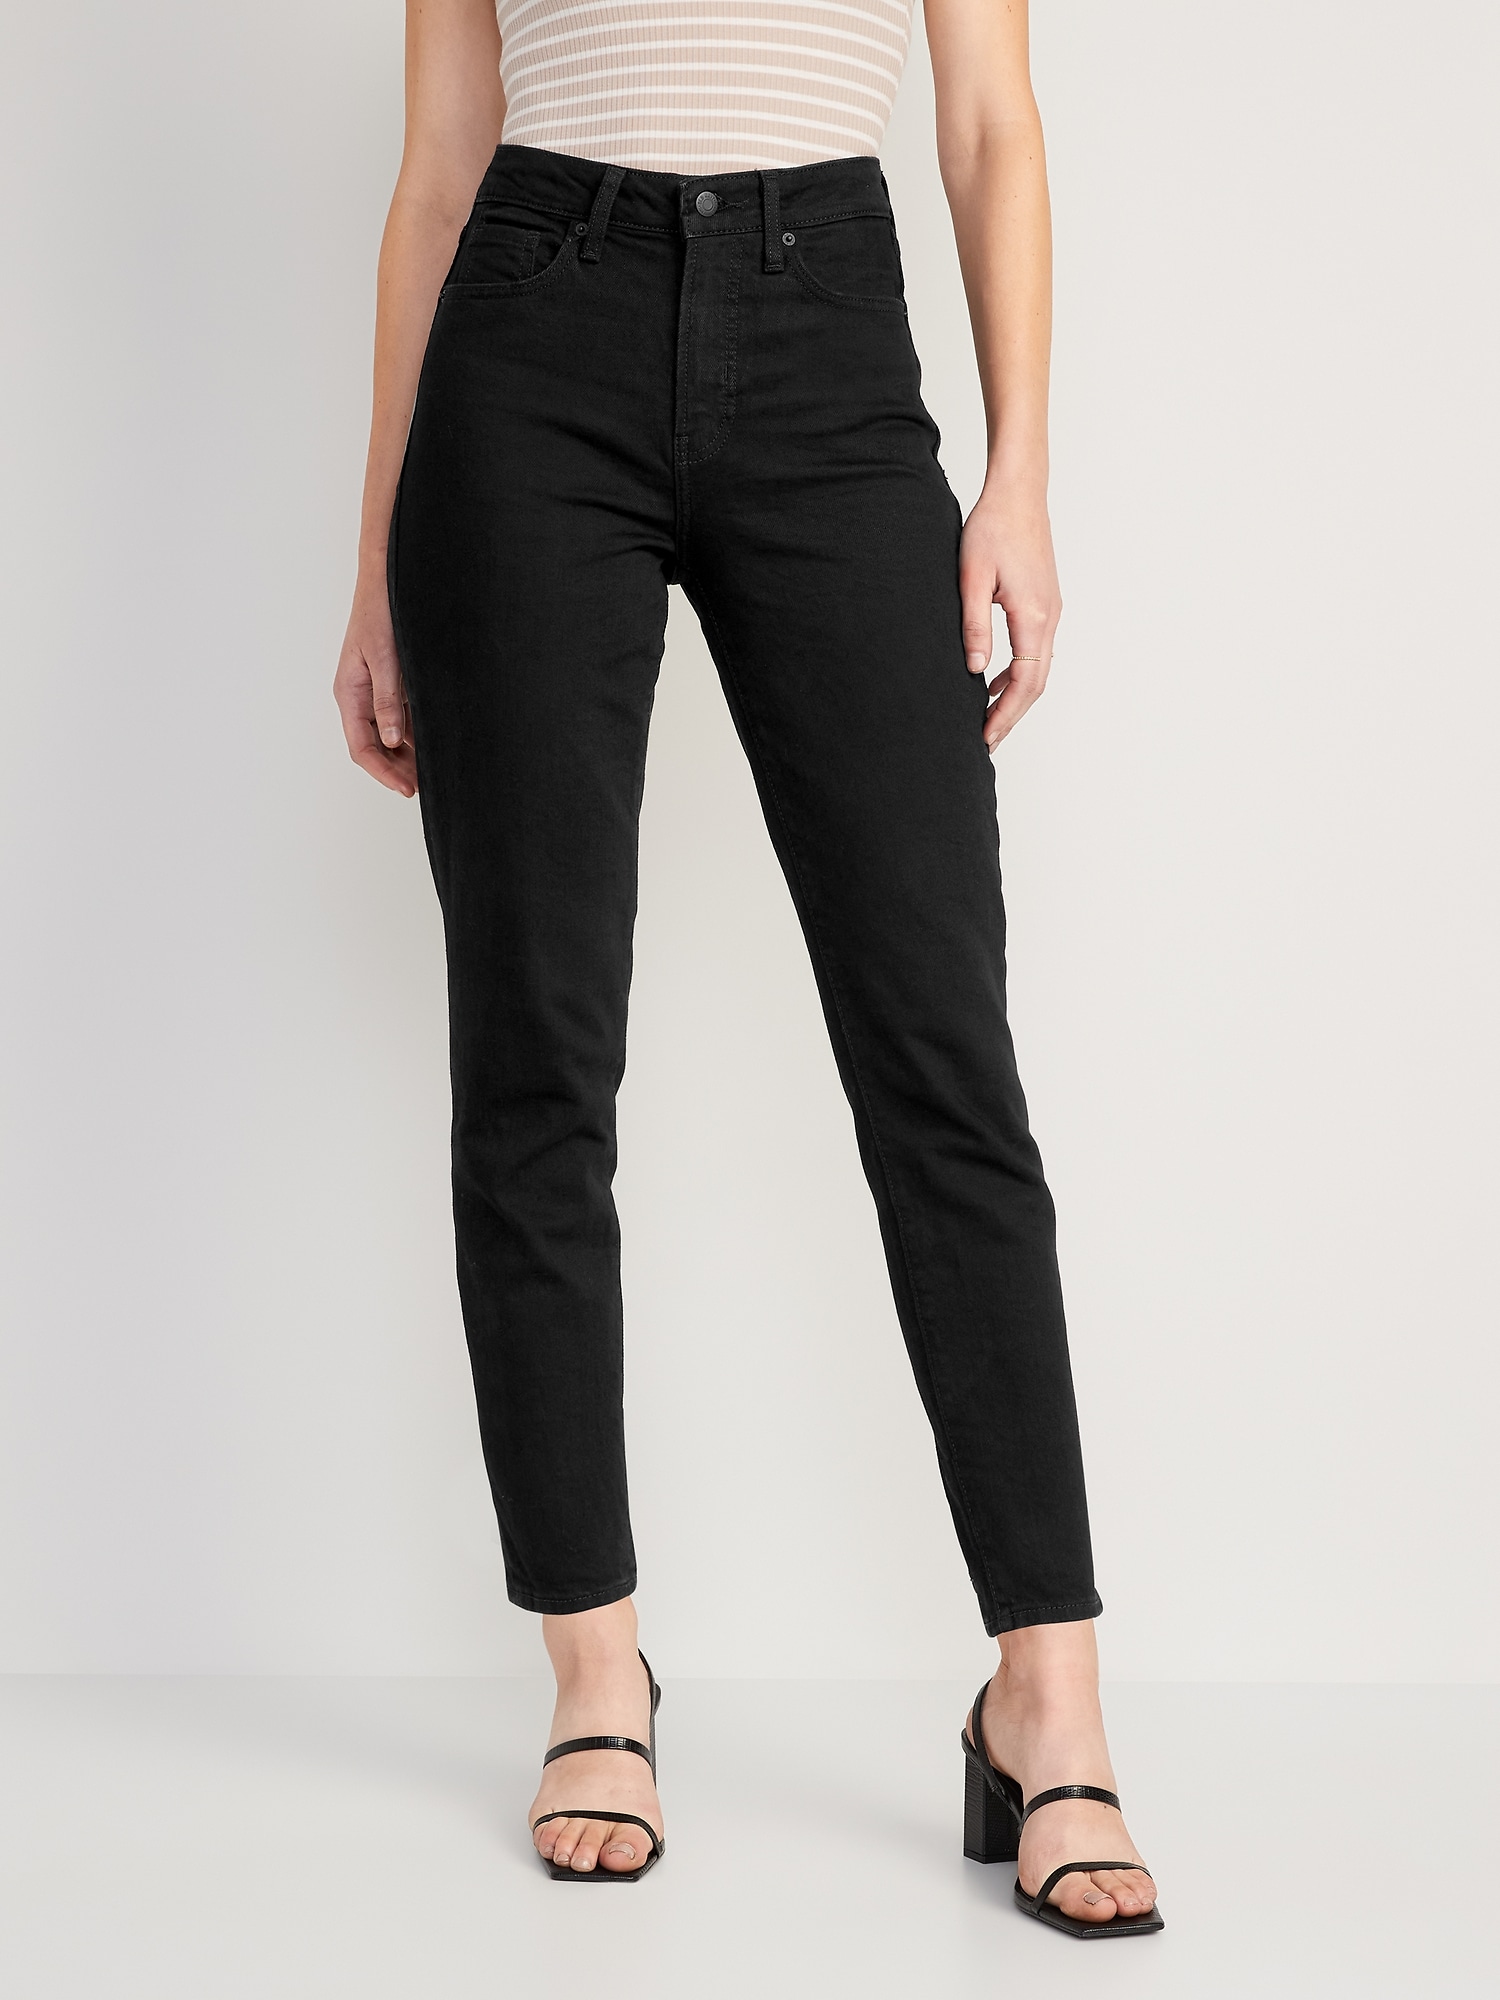 Black High-waisted Jeans for Women